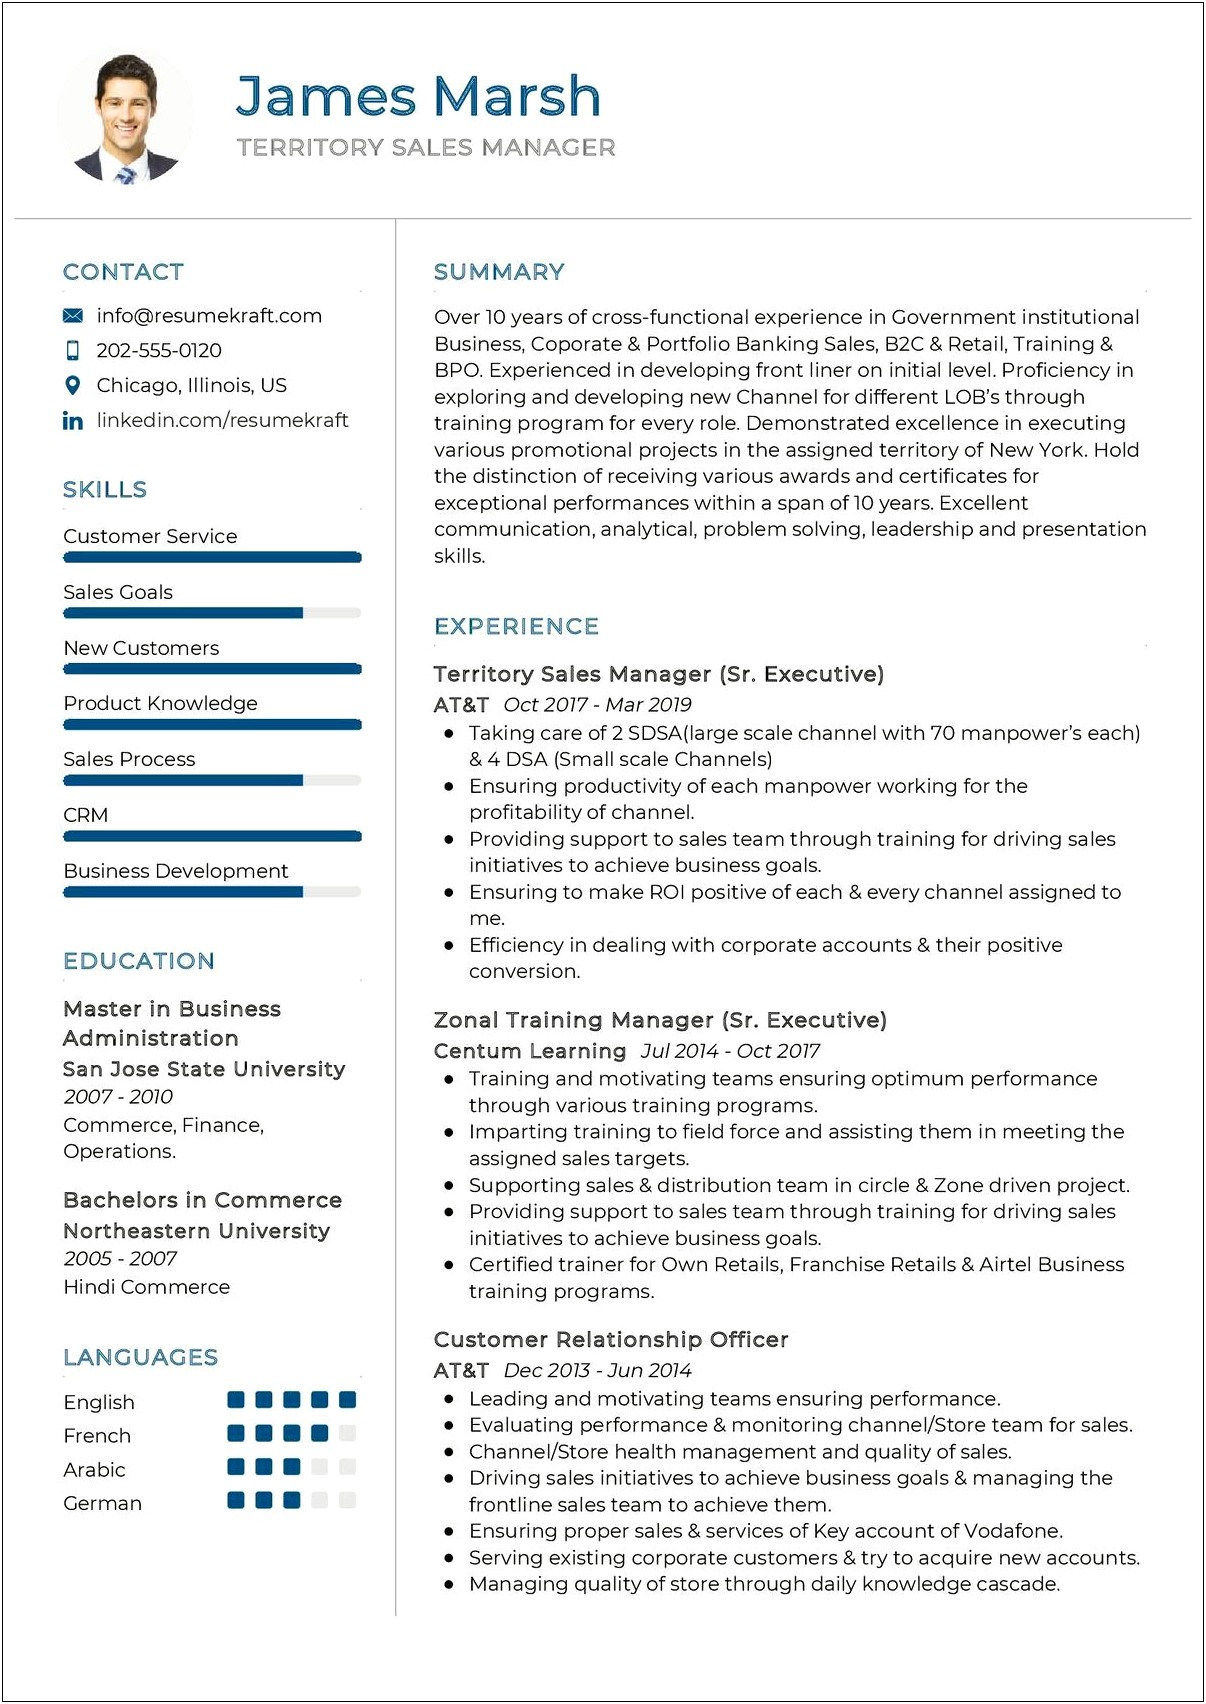 Territory Sales Manager Resume Skills